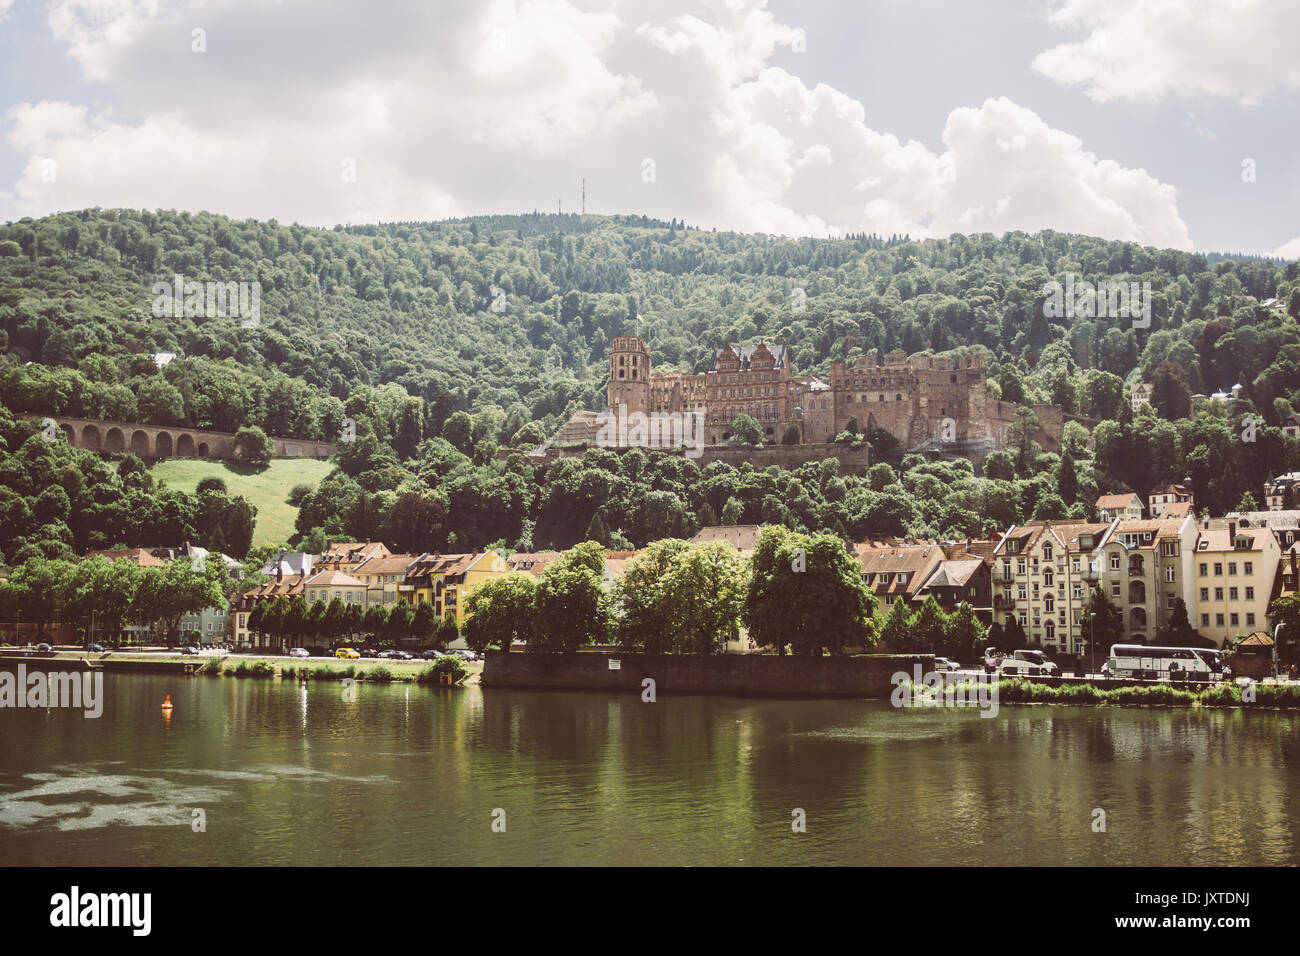 Heidelberger Schloss and the old city of Heidelberg at the Neckar river in Germany. Stock Photo